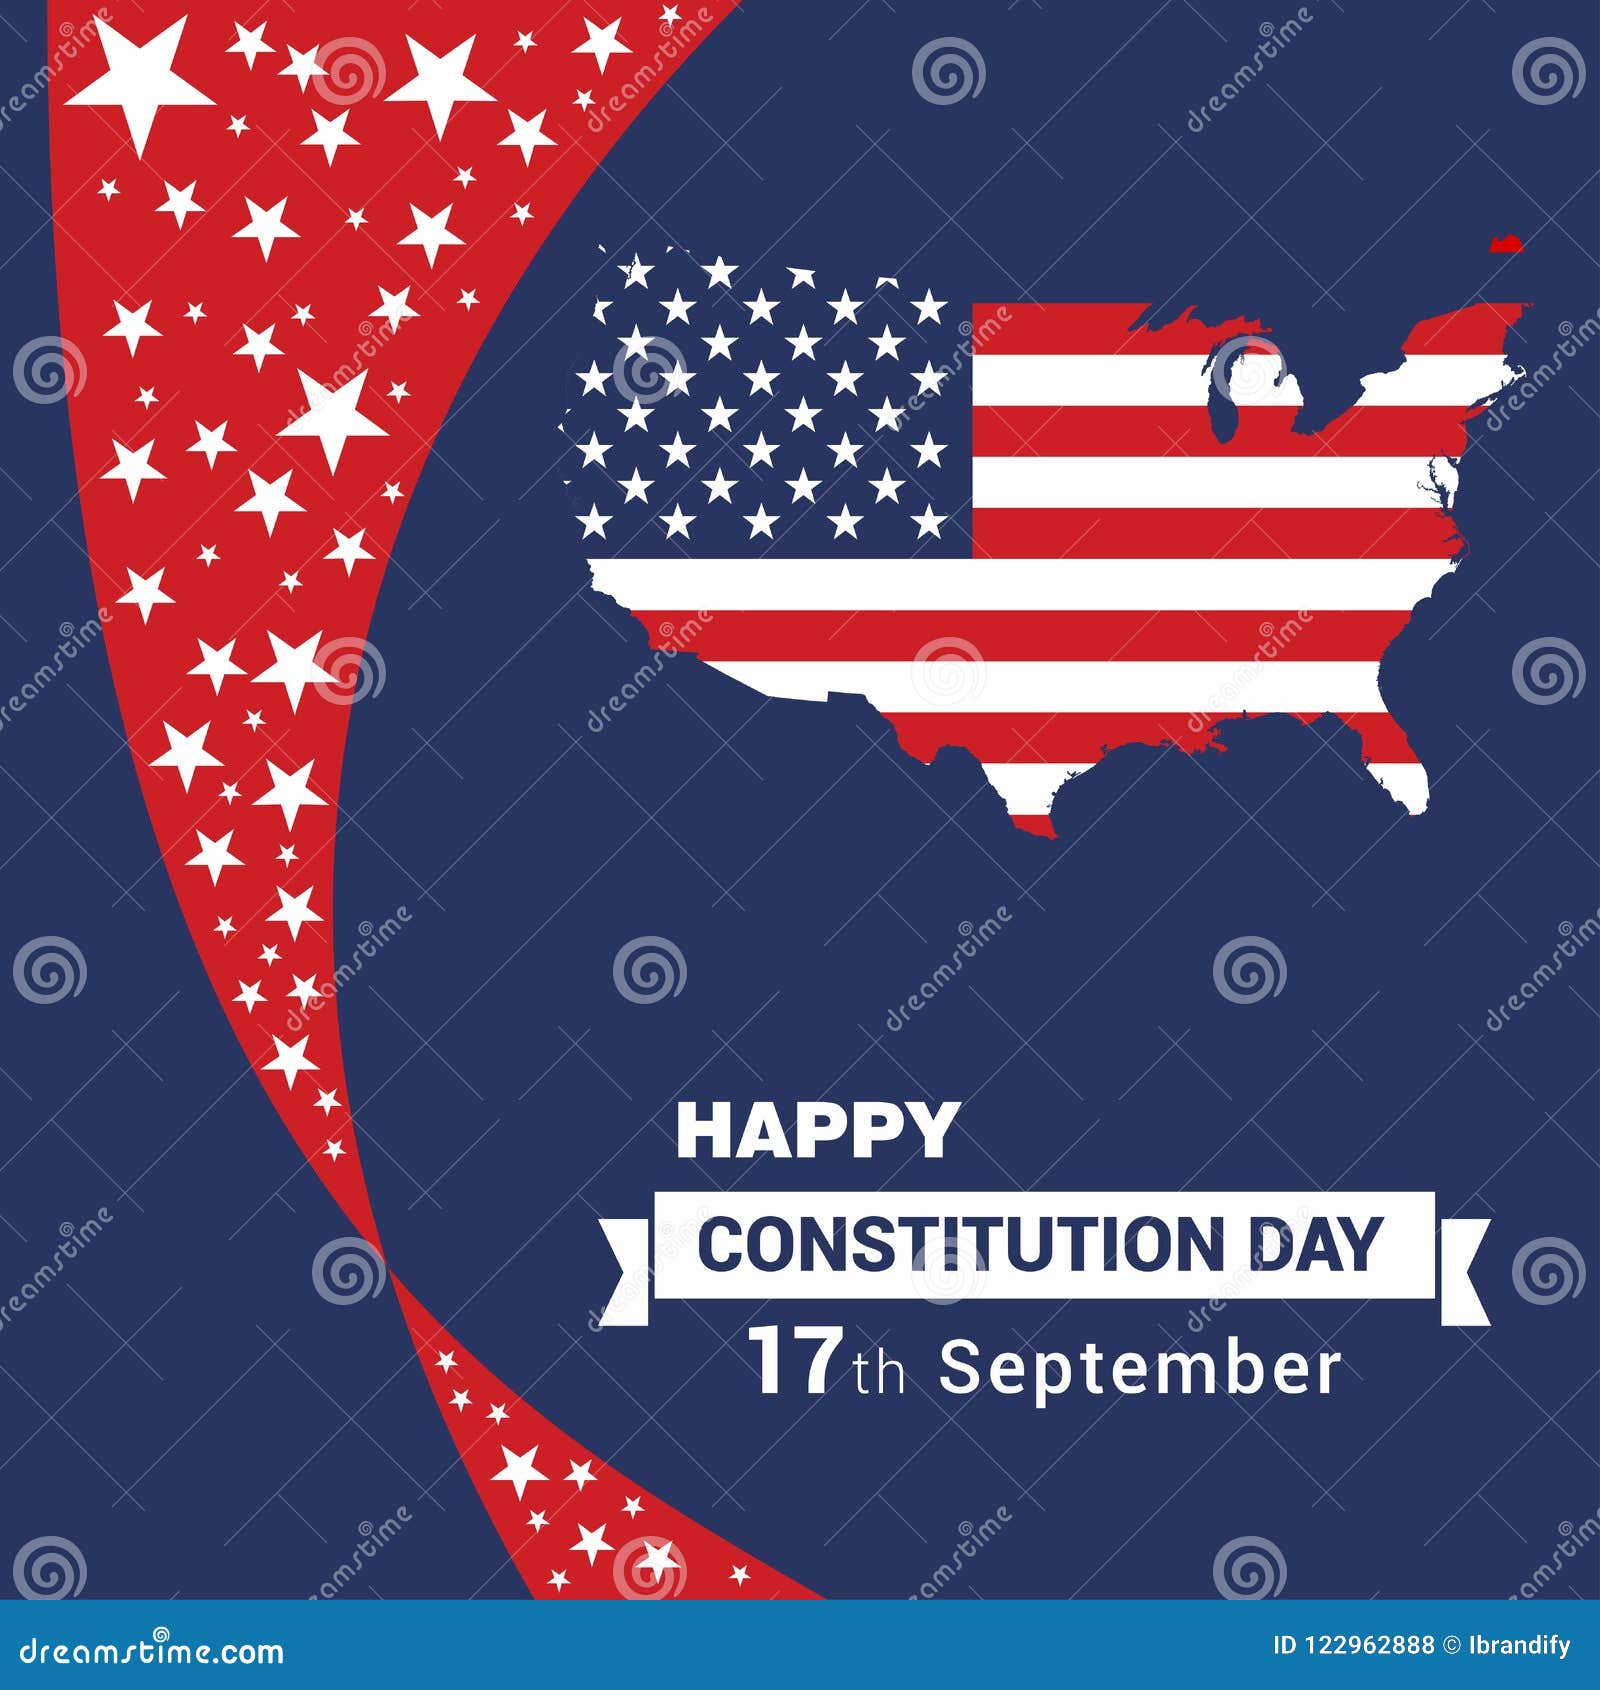 Happy Constitution Day Design Card Vector Stock Vector Illustration